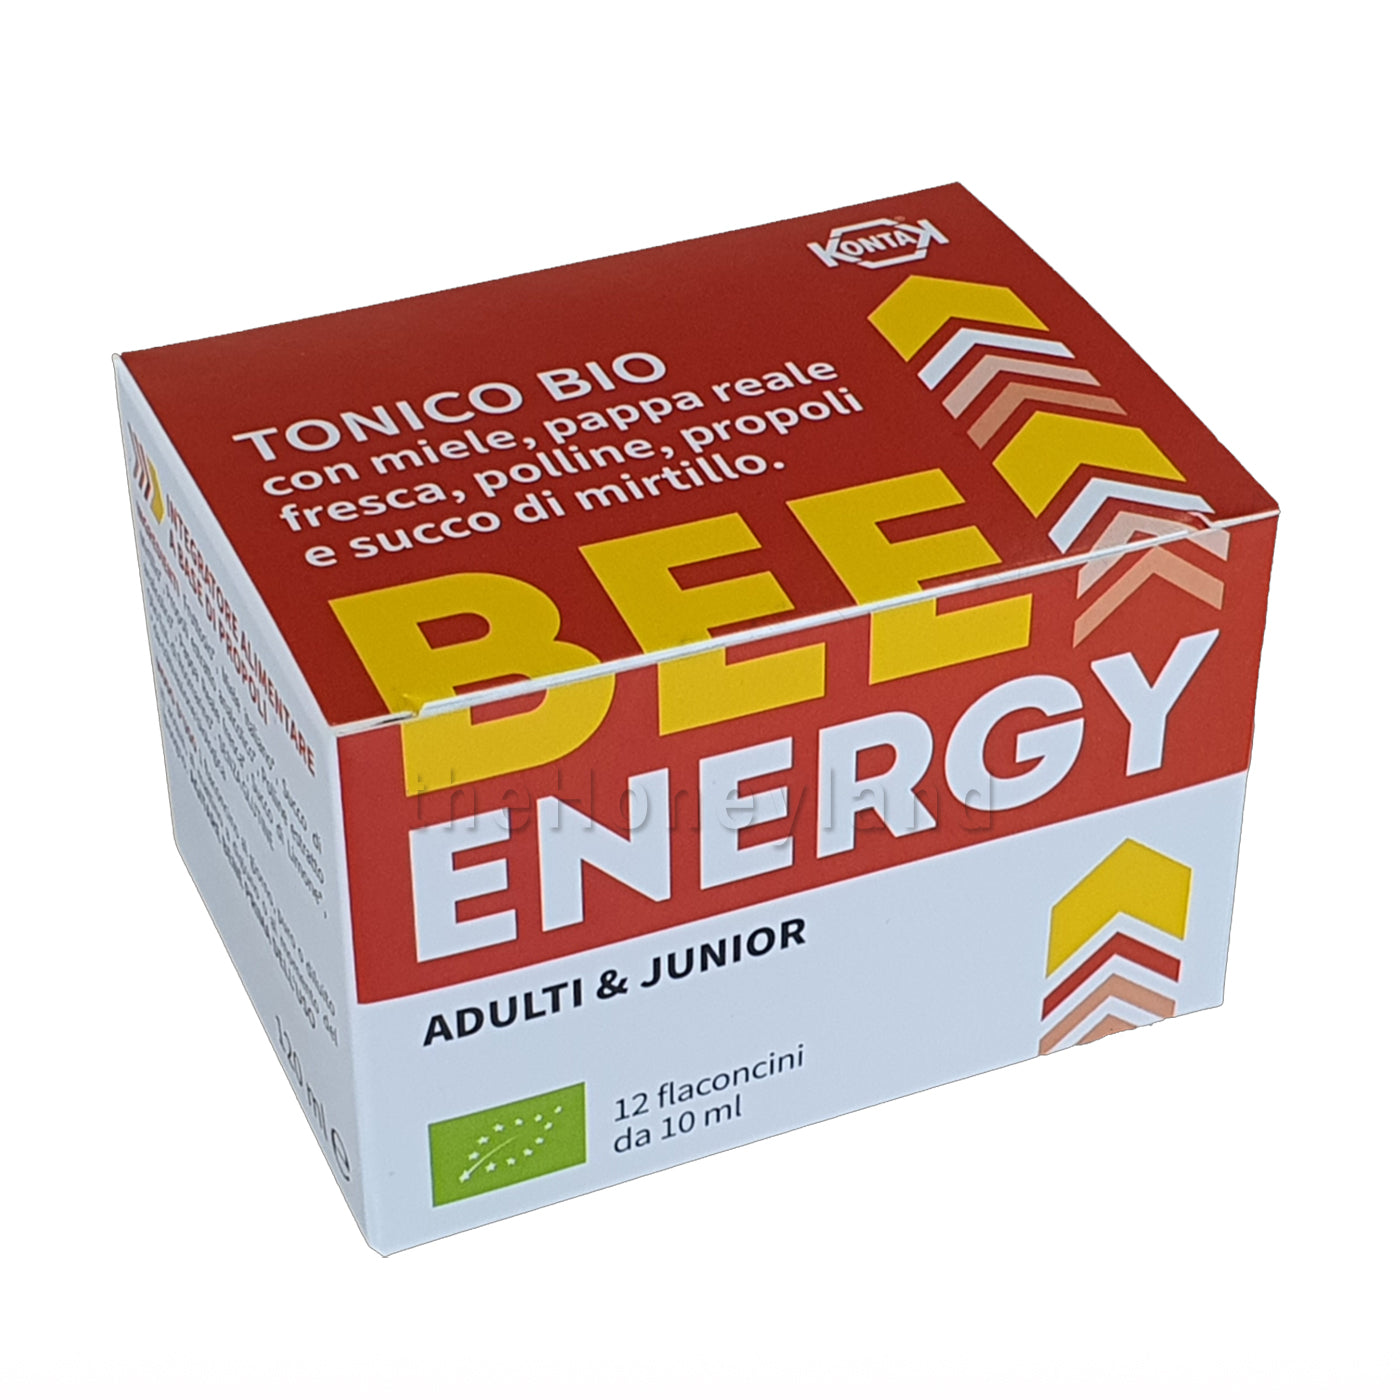 Bee Energy - Fresh royal jelly, pollen and propolis supplement